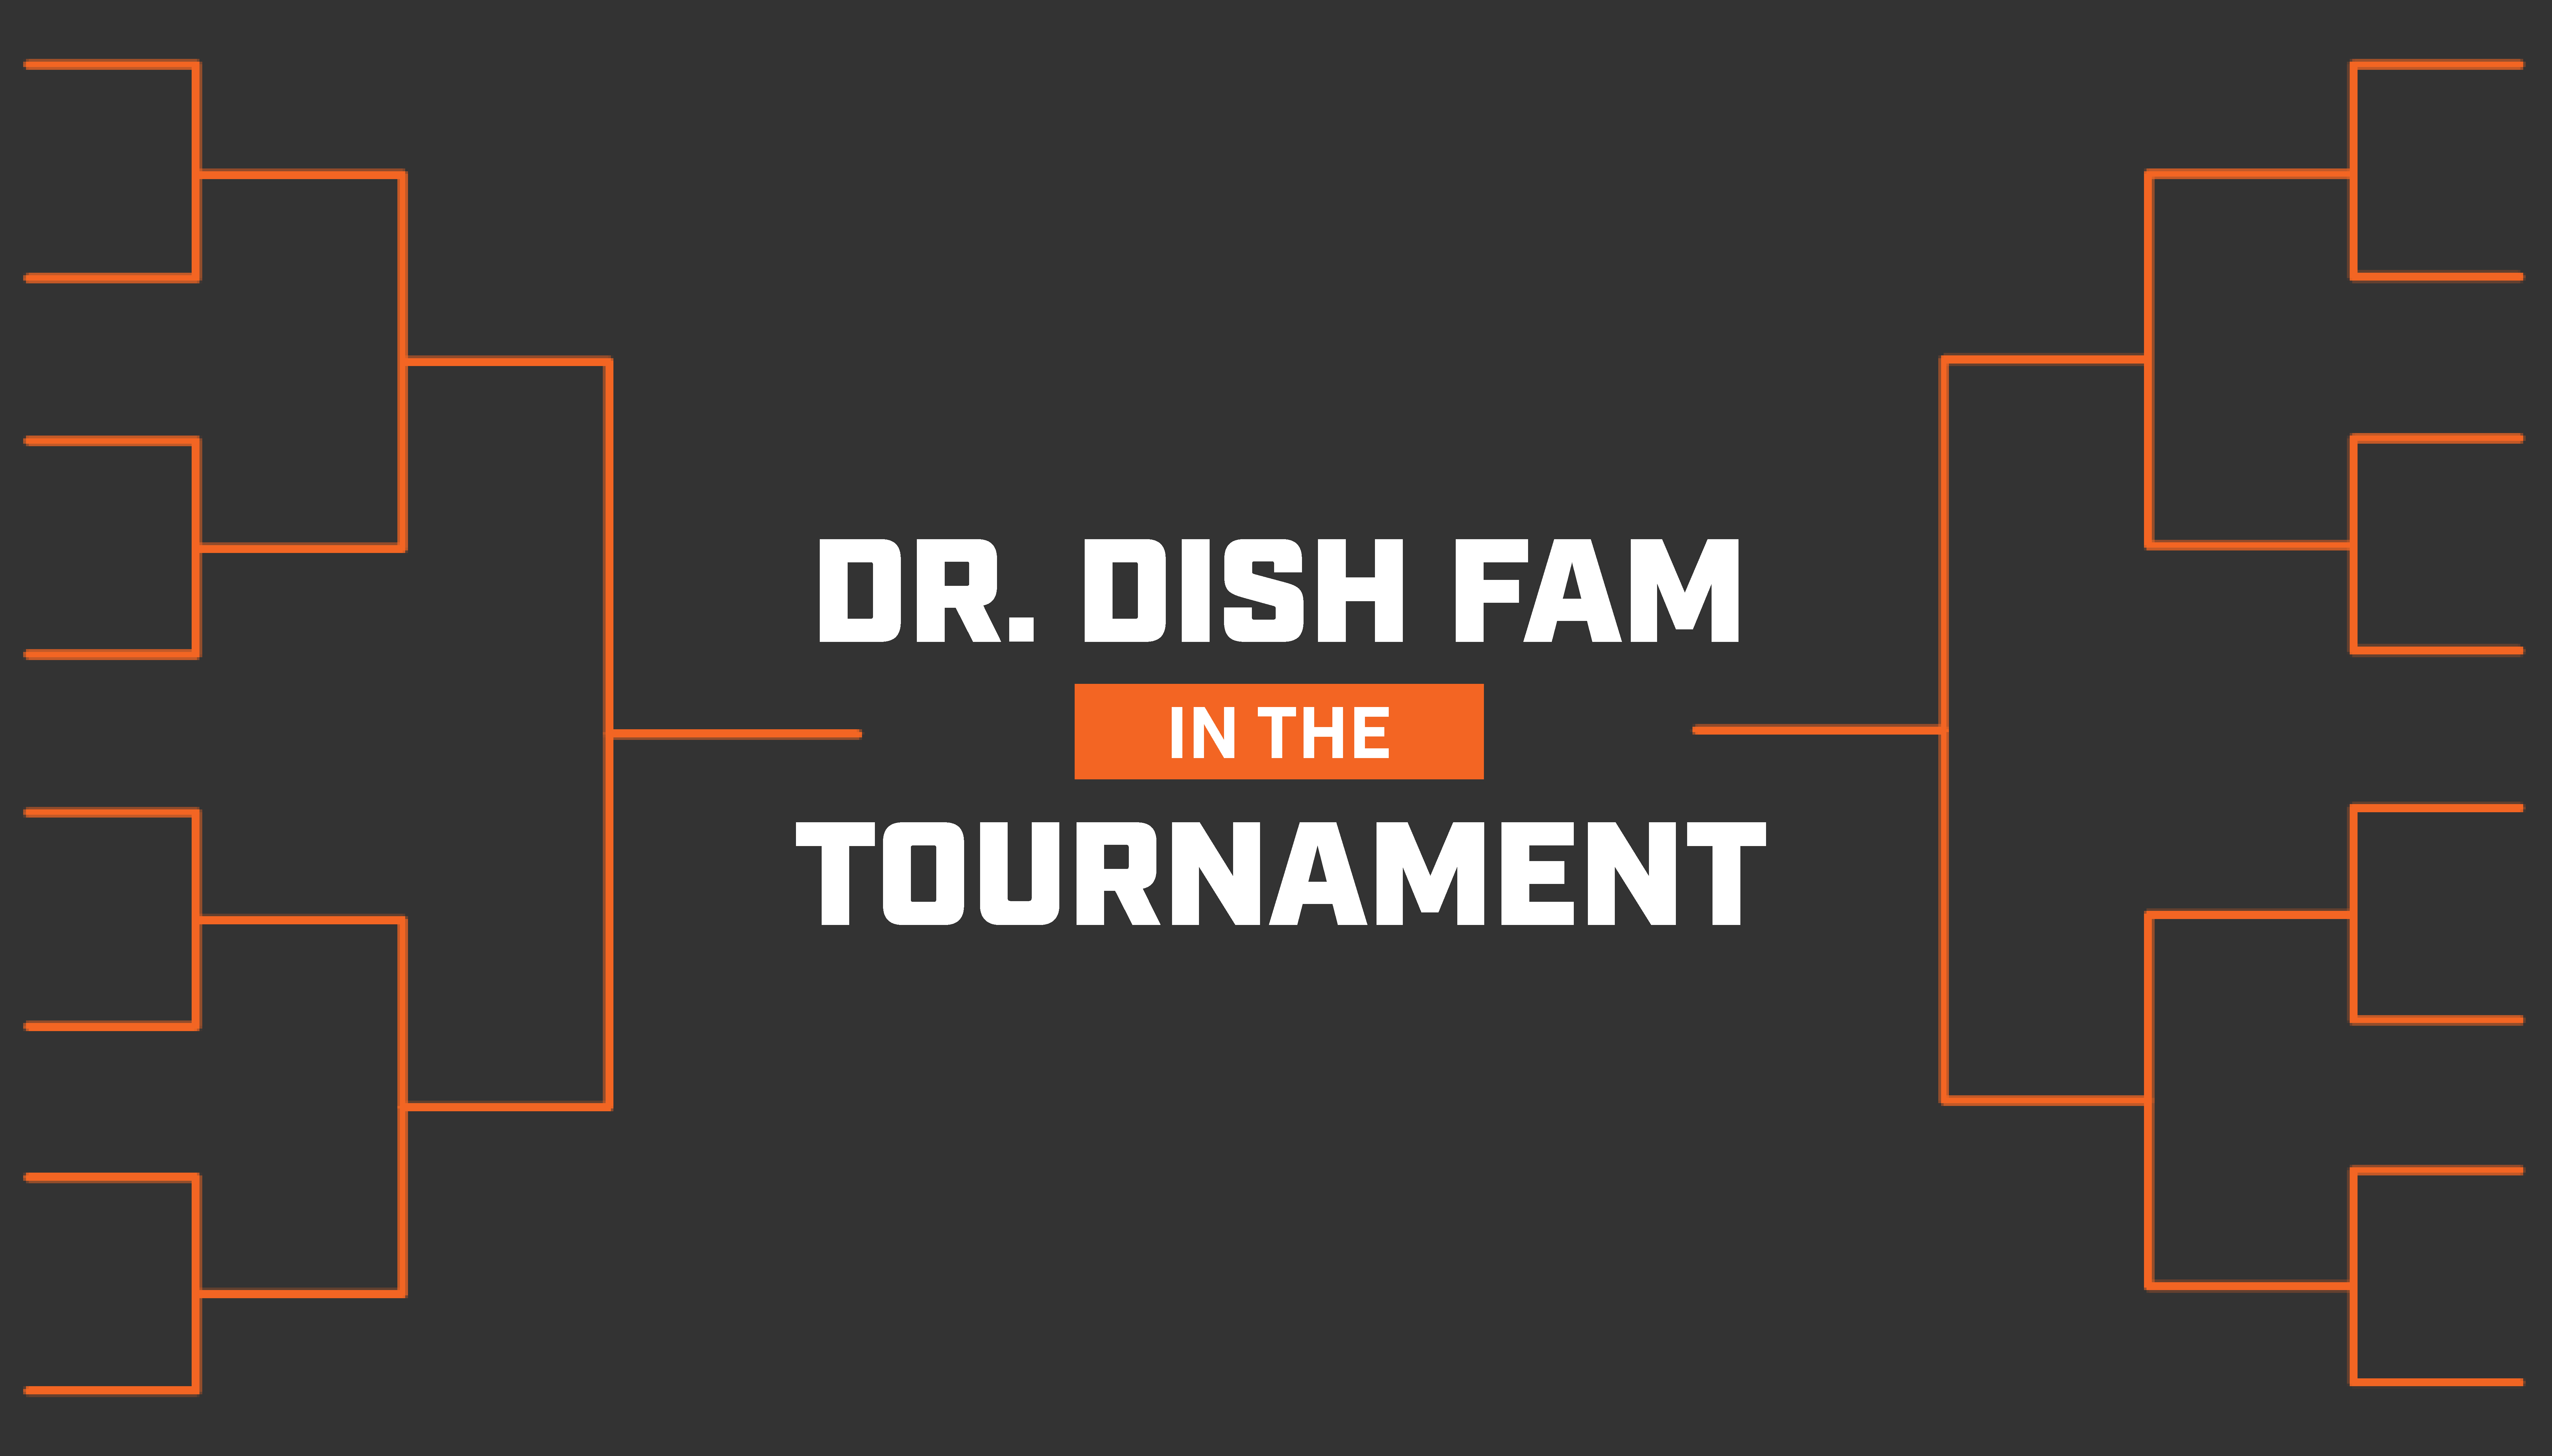 Dr. Dish Fam Members in the Tournament